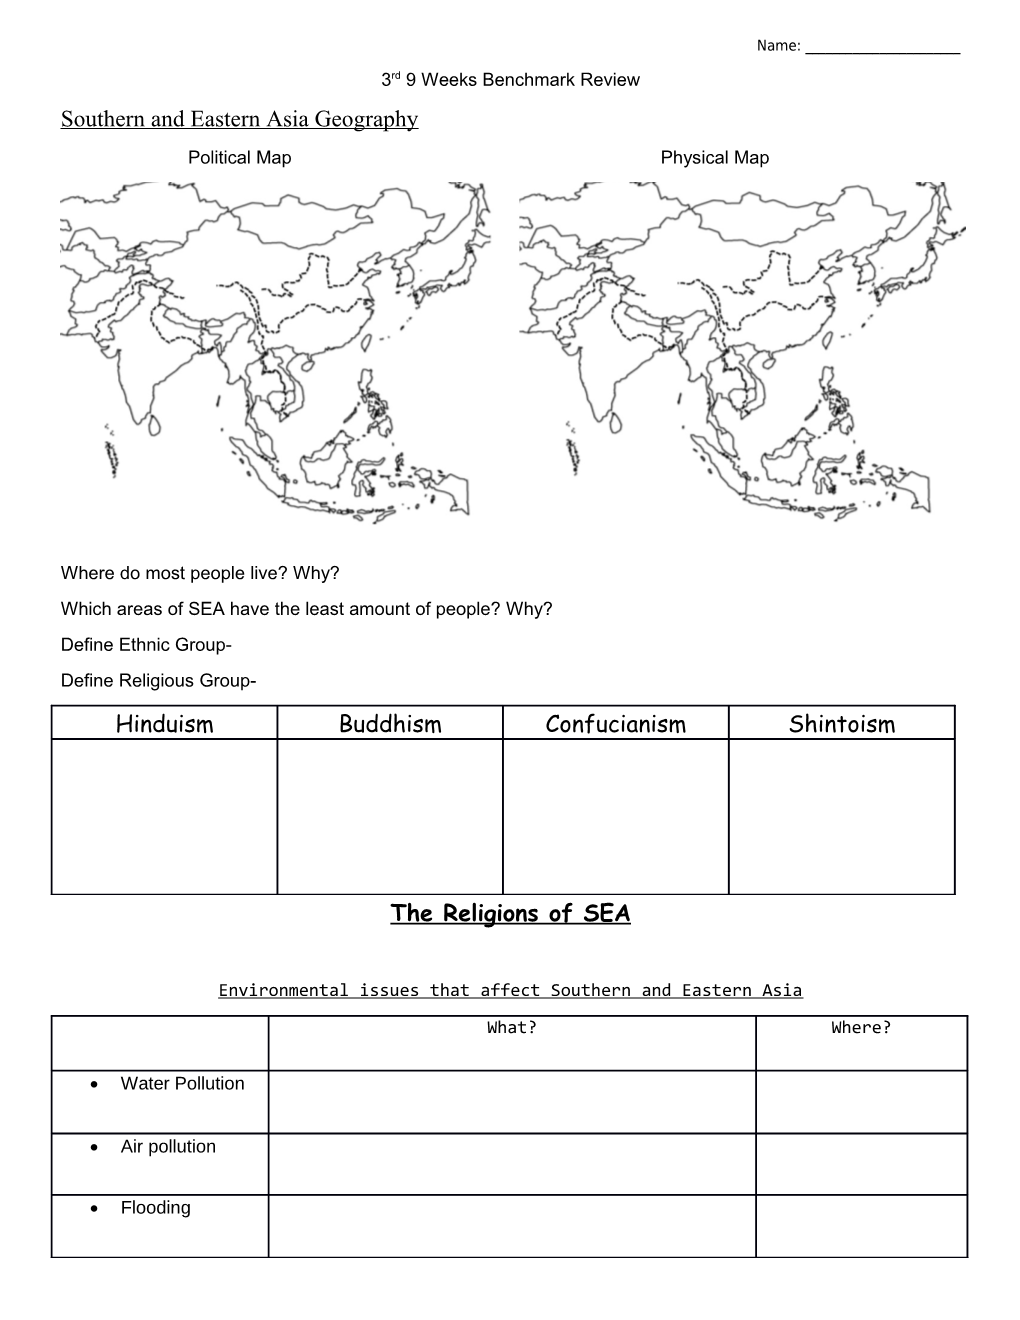 Southern and Eastern Asia Geography